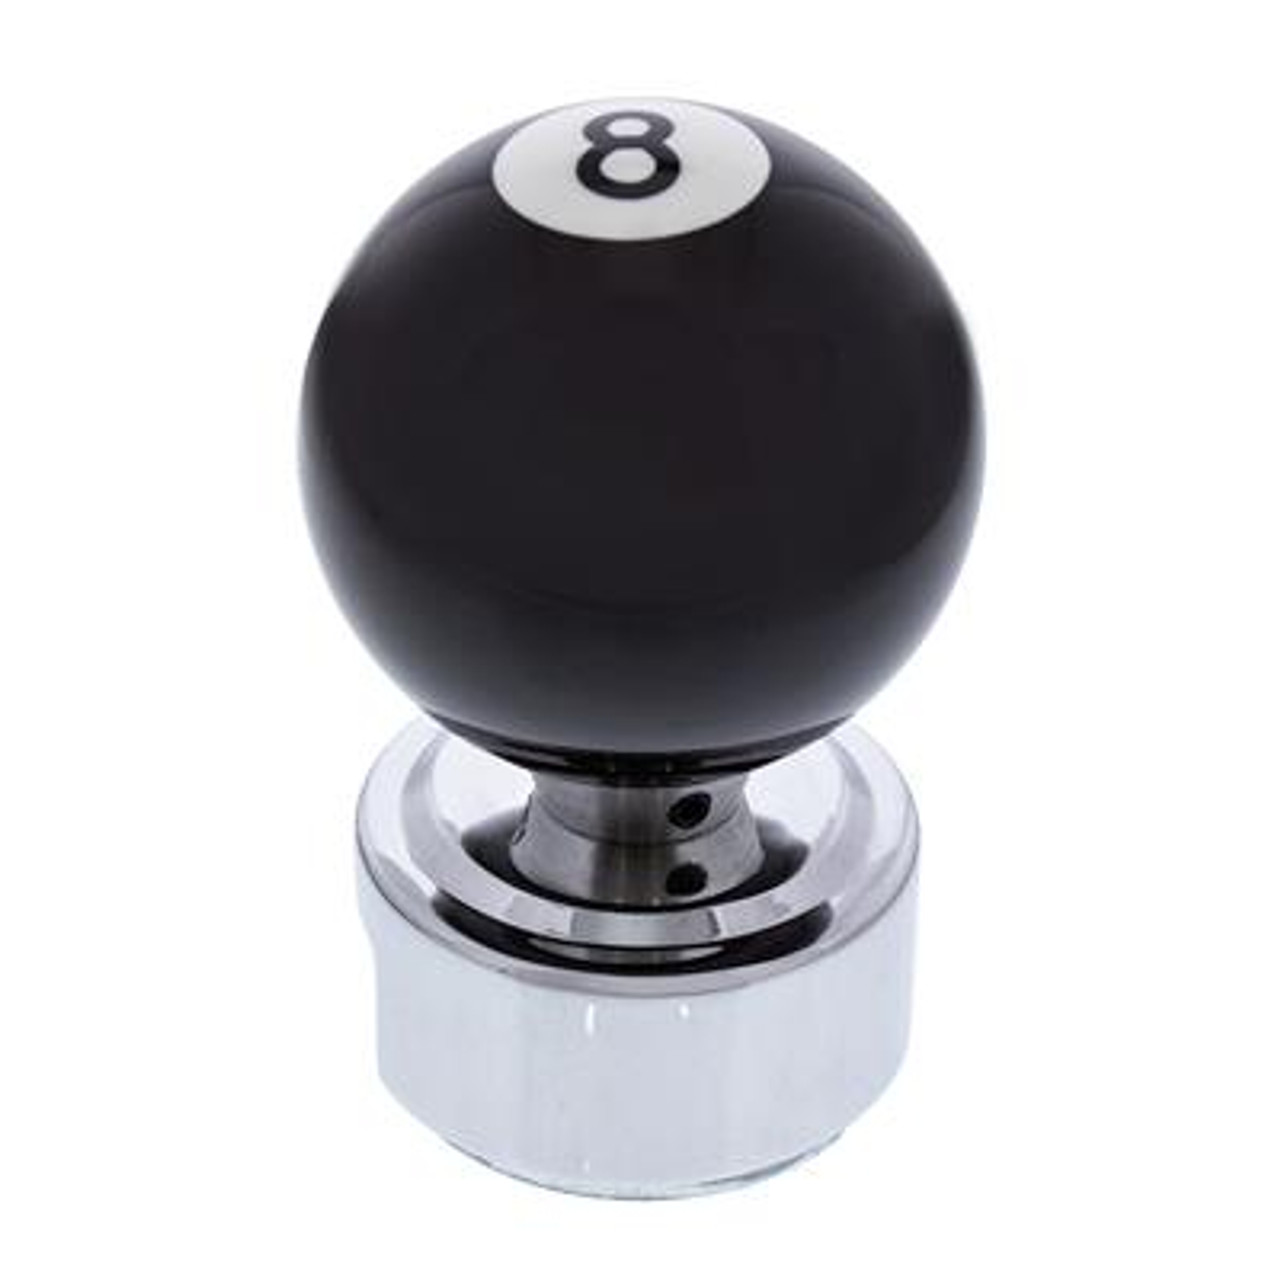 It’s time to change out that old shift knob for something that better suits your style and that also has better shifting feel. Also, our shift shaft extensions will make shifting a breeze by bringing the shift knob closer to the steering wheel.